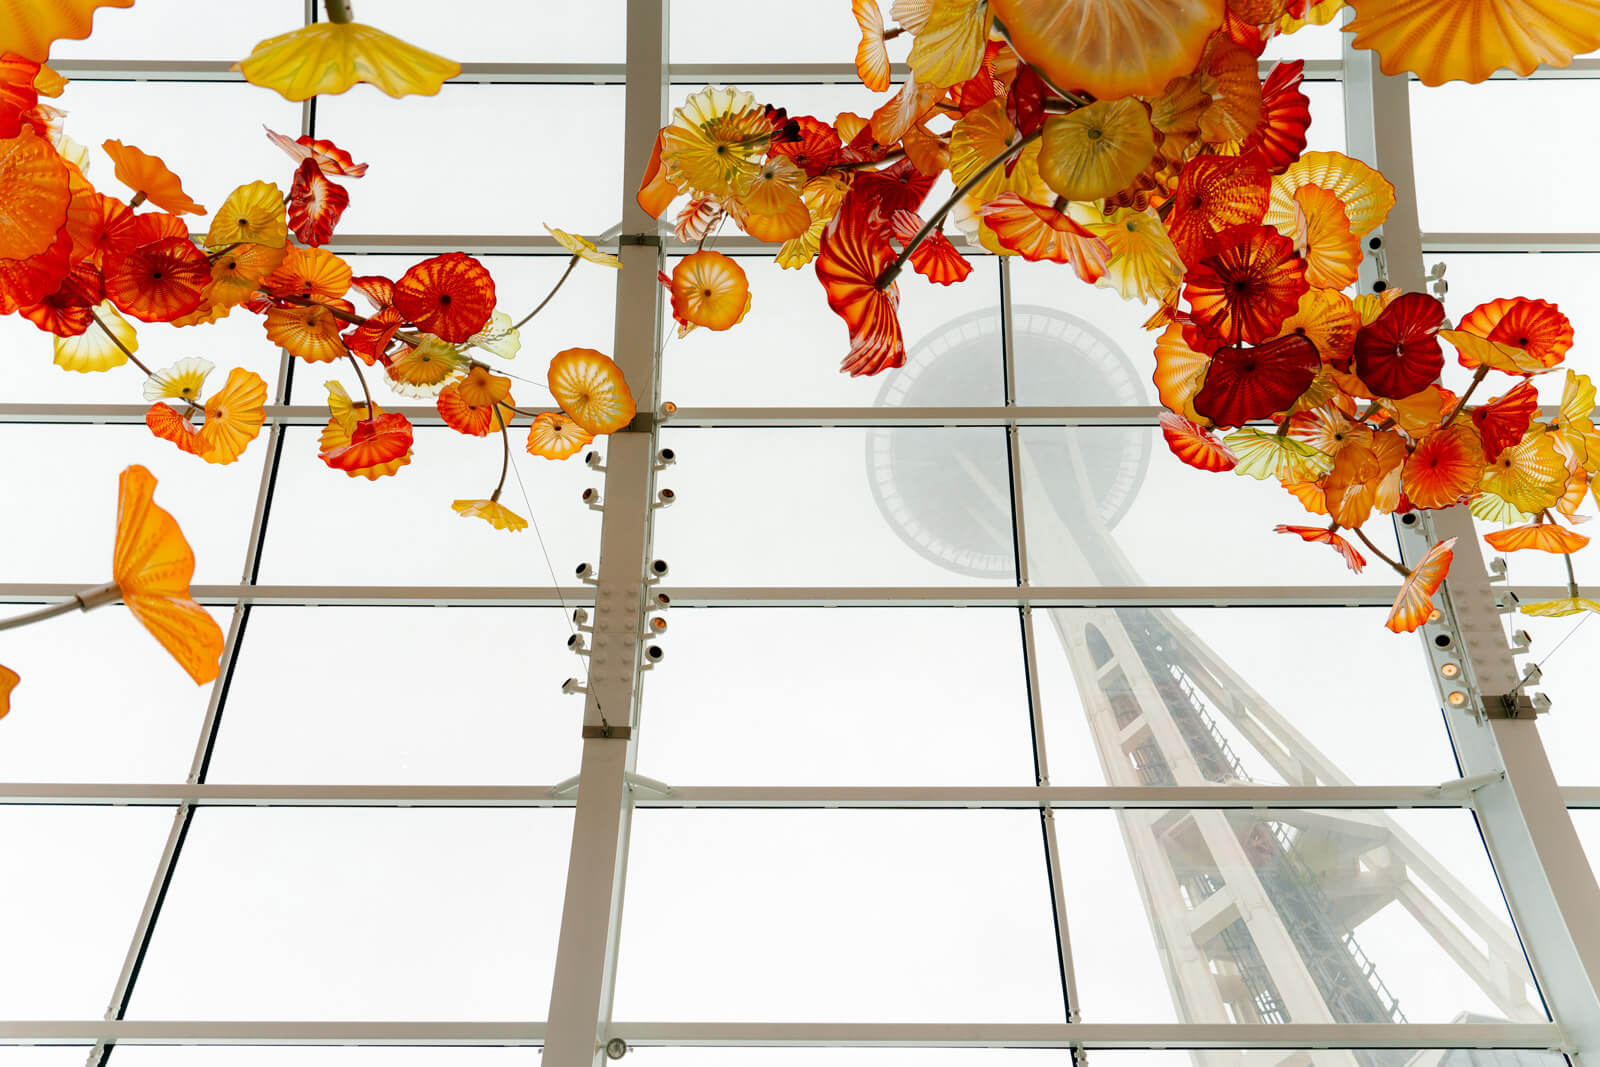 Orange, yellow, and red glass is suspended from a glass ceiling at Chihuly Garden and Glass in Seattle